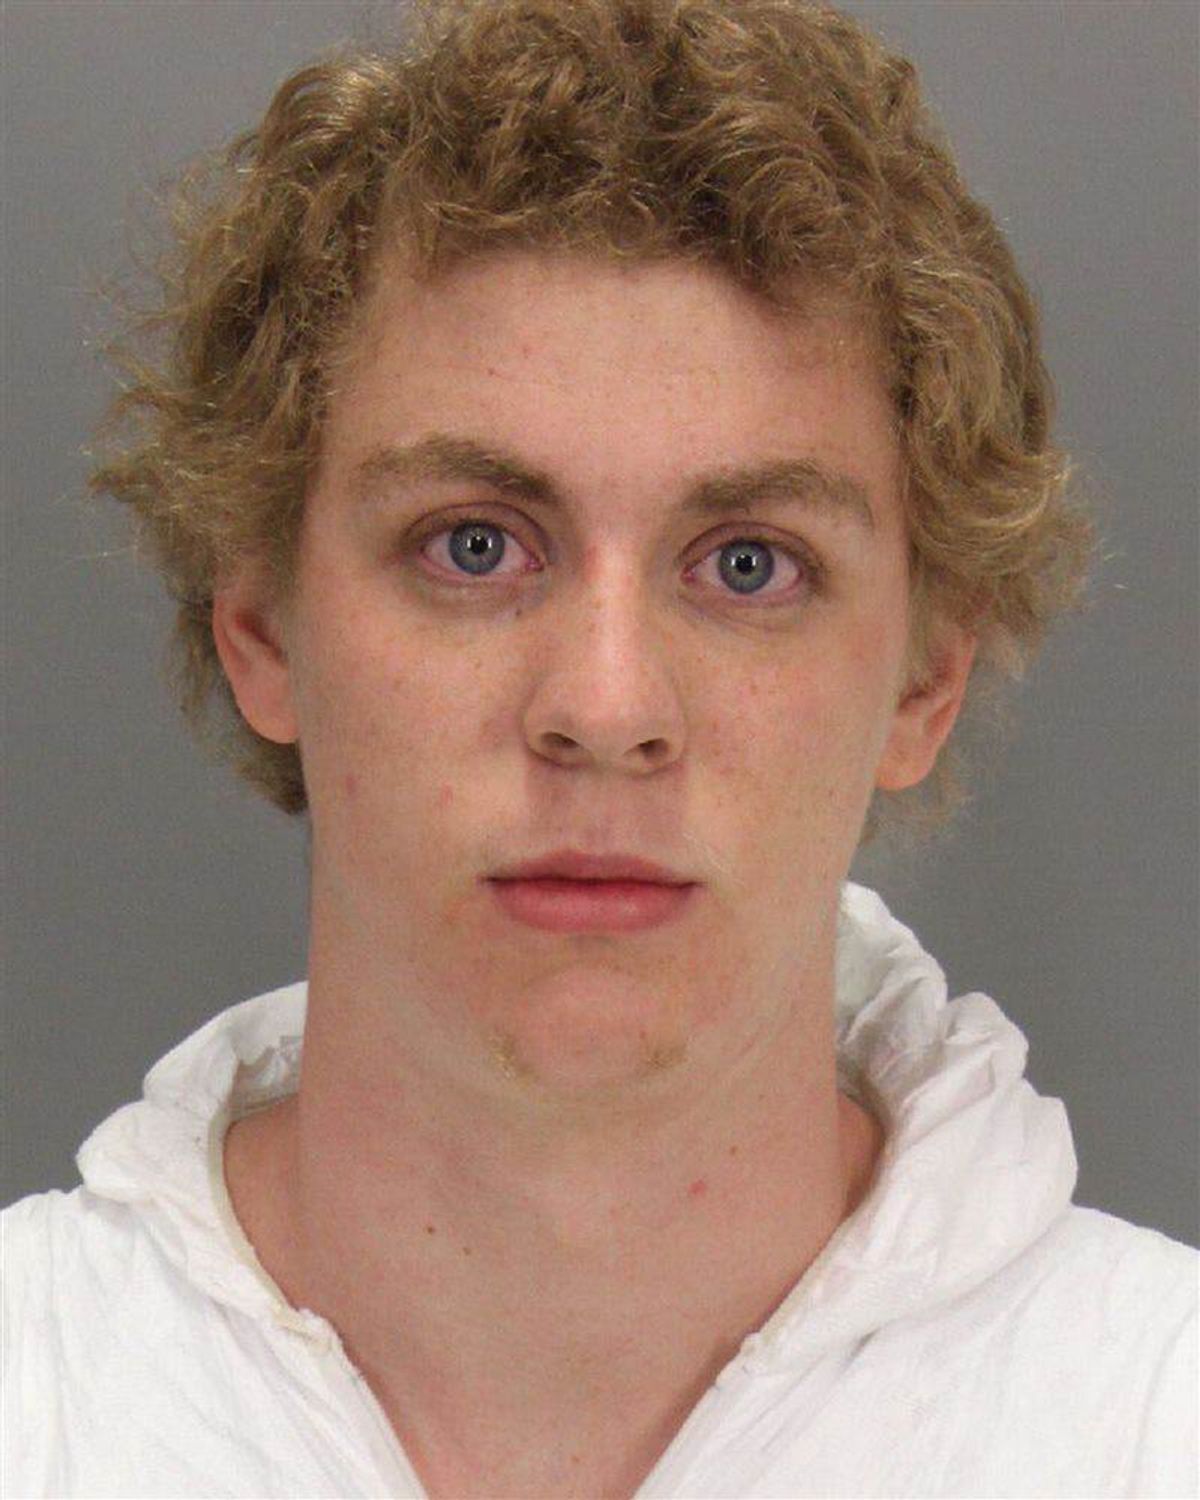 Stanford Perpetuating Rape Culture: The Problem Is Society, Not Alcohol